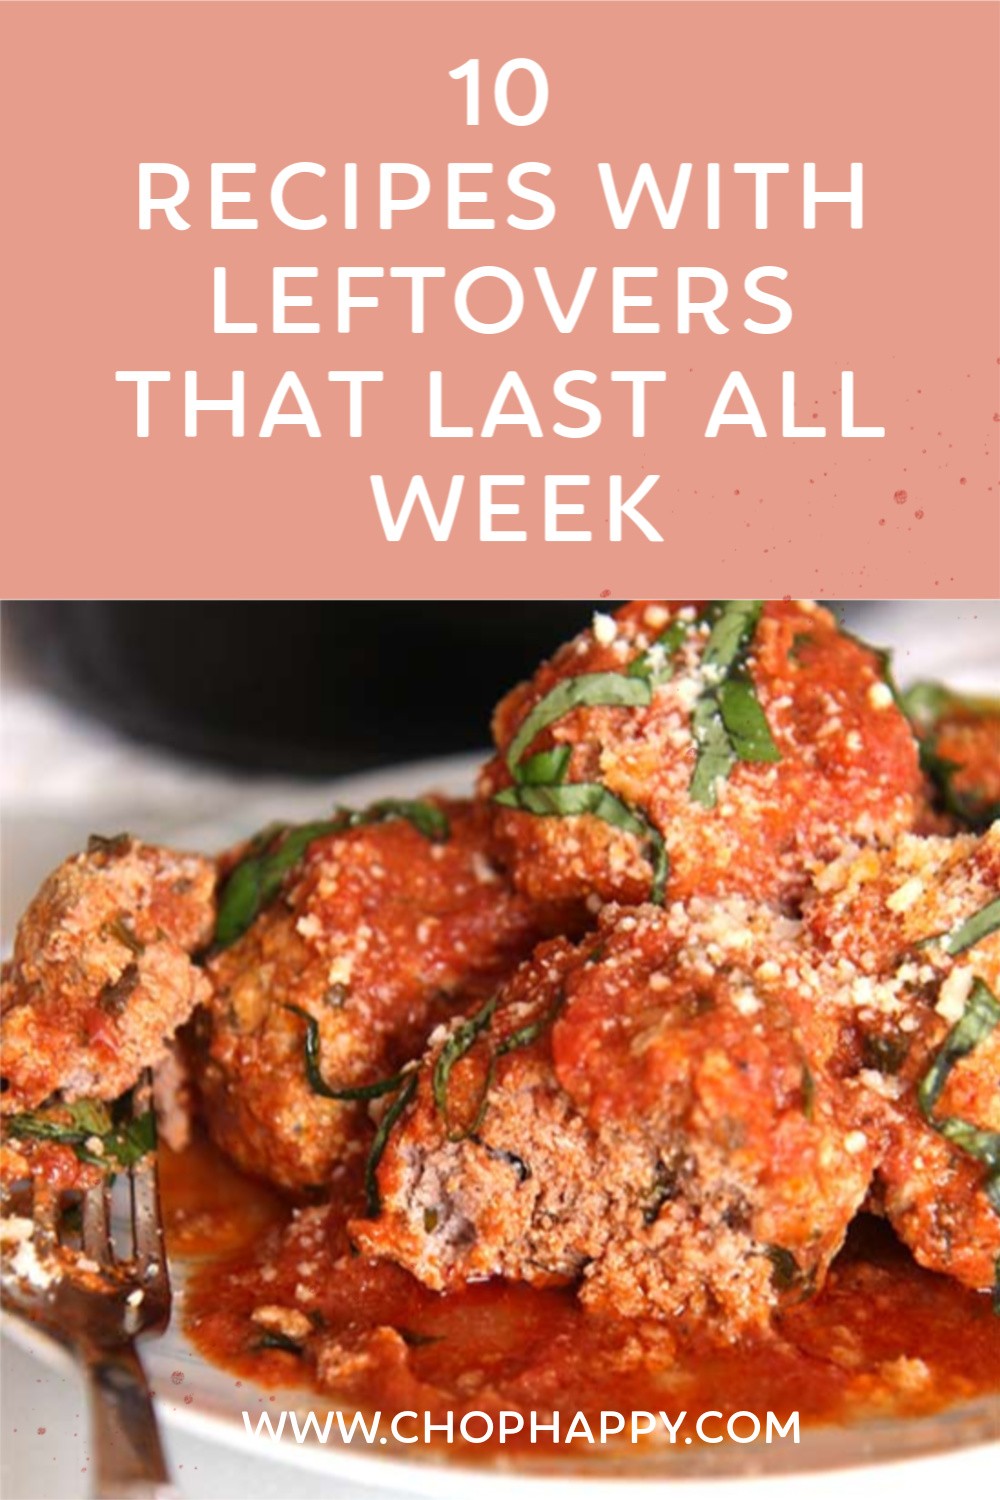 10 Recipes With Leftovers That Last All Week. These simple recipes that the leftovers last all week and more time for you to spend with your family! Using the slow cooker, 3 ingredient recipes, & pasta. Happy Cooking! www.chophappy.com #leftovers #mealprep